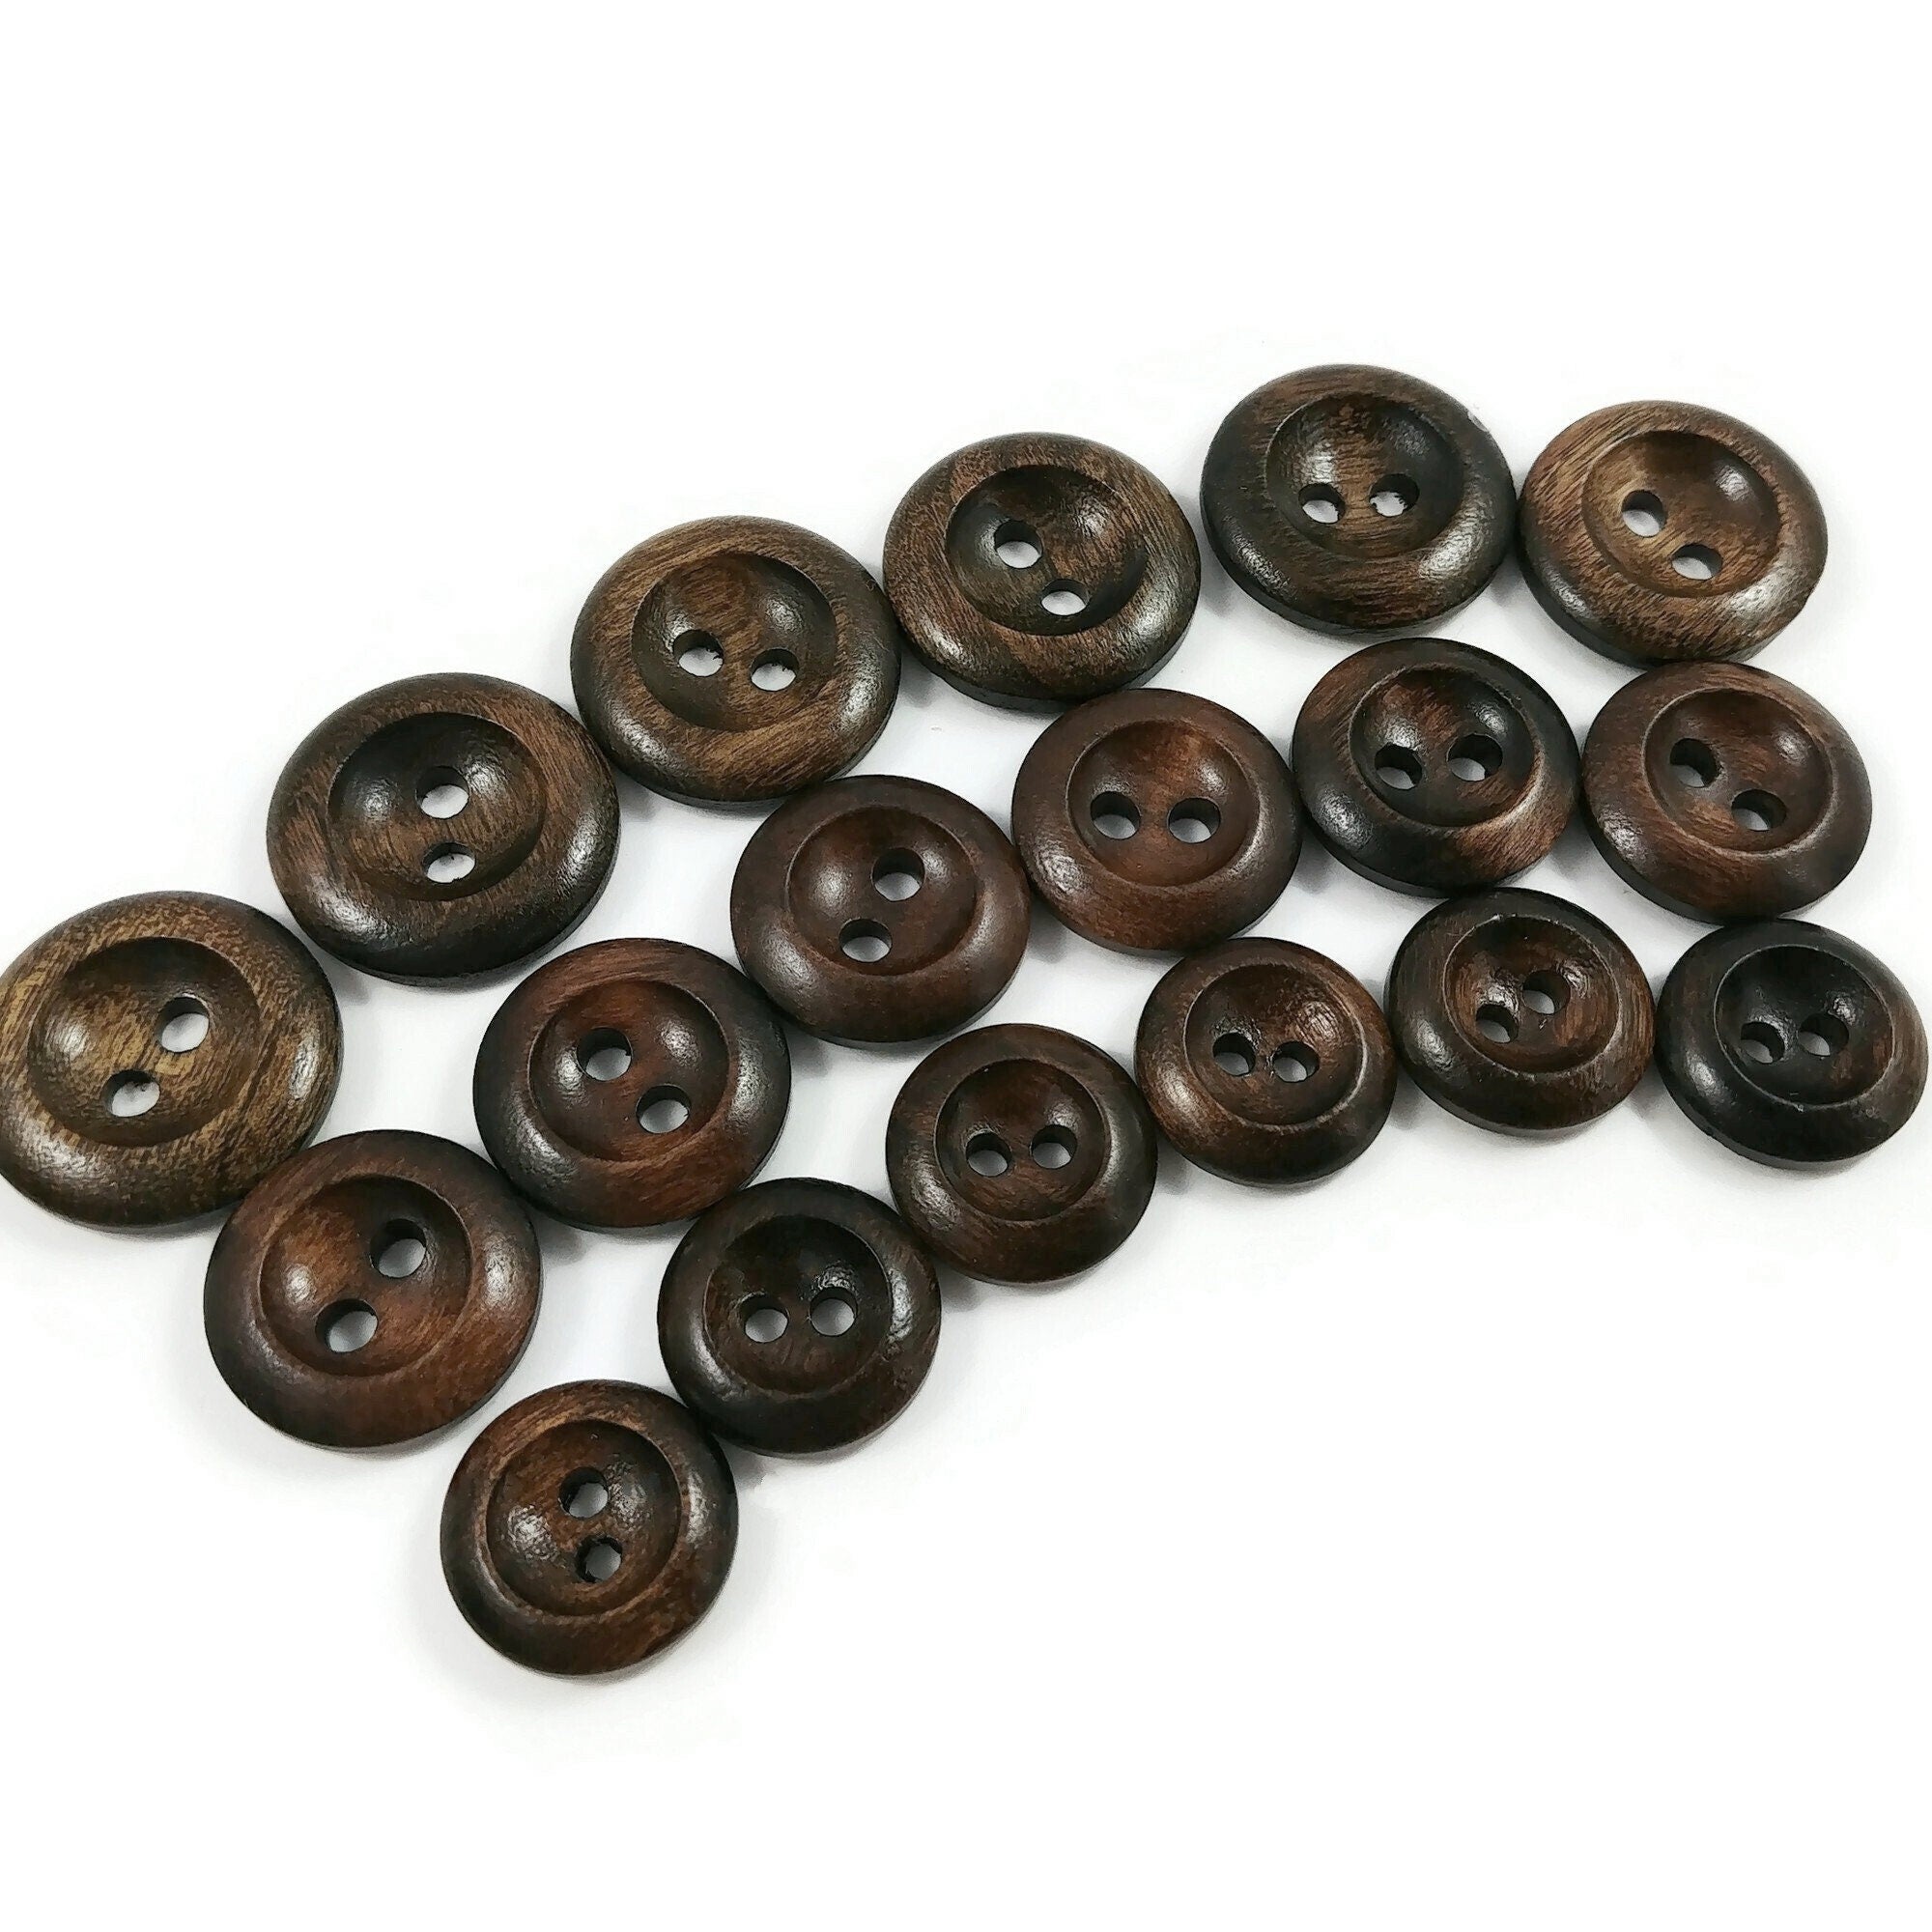 Dark Olive wood buttons, 15mm, 18mm, 20mm, Round edge walnut sewing buttons, Made in Italy